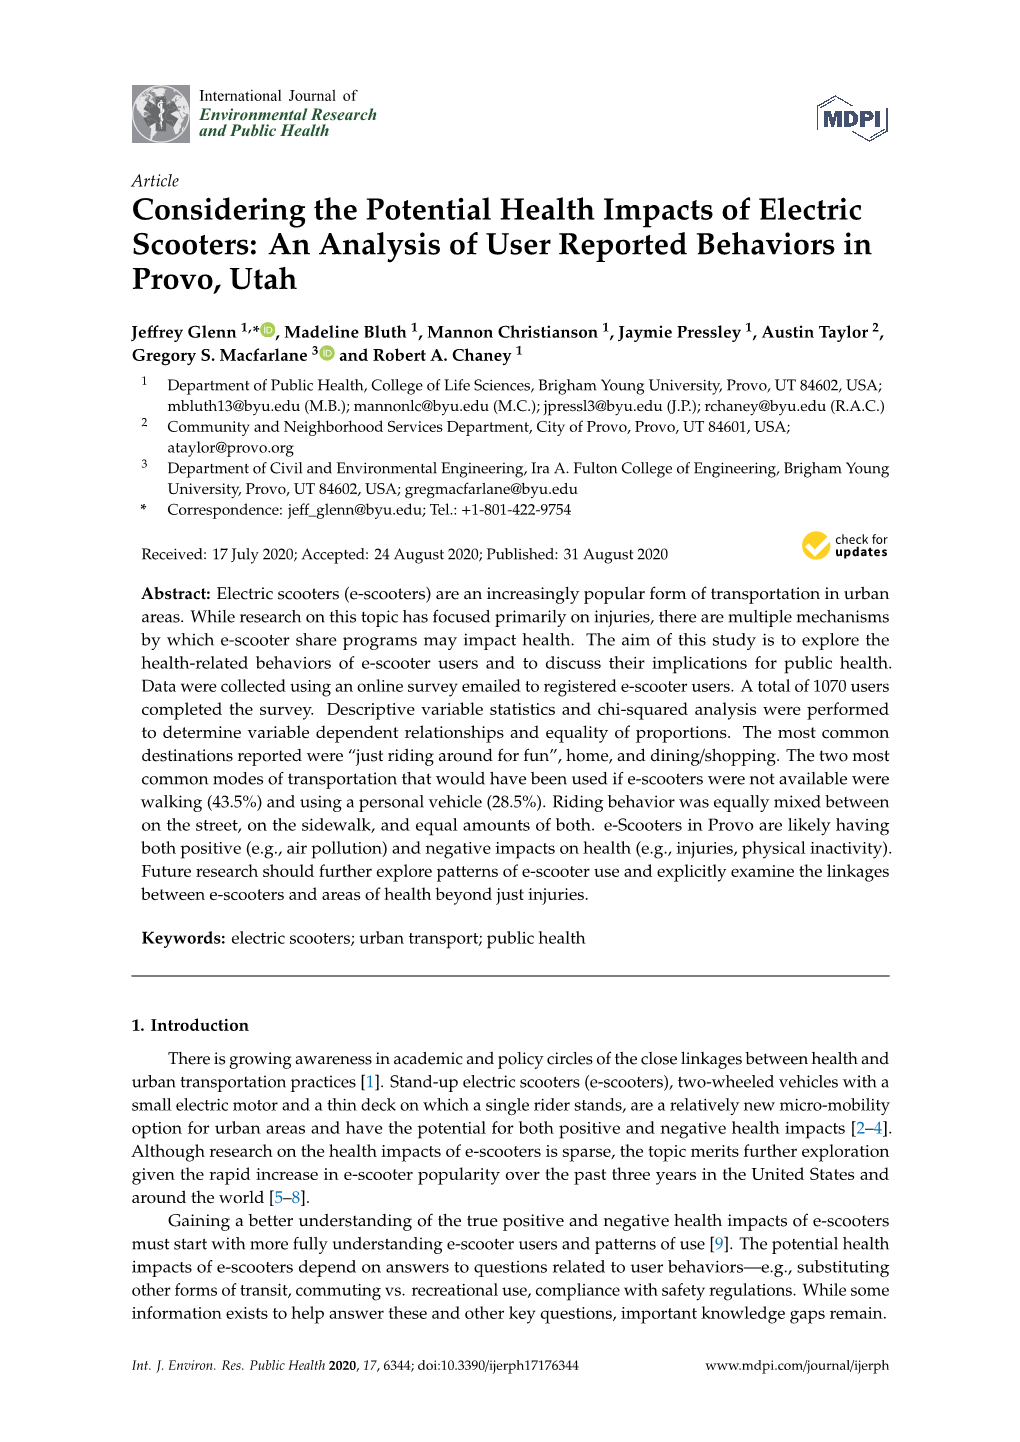 Considering the Potential Health Impacts of Electric Scooters: an Analysis of User Reported Behaviors in Provo, Utah